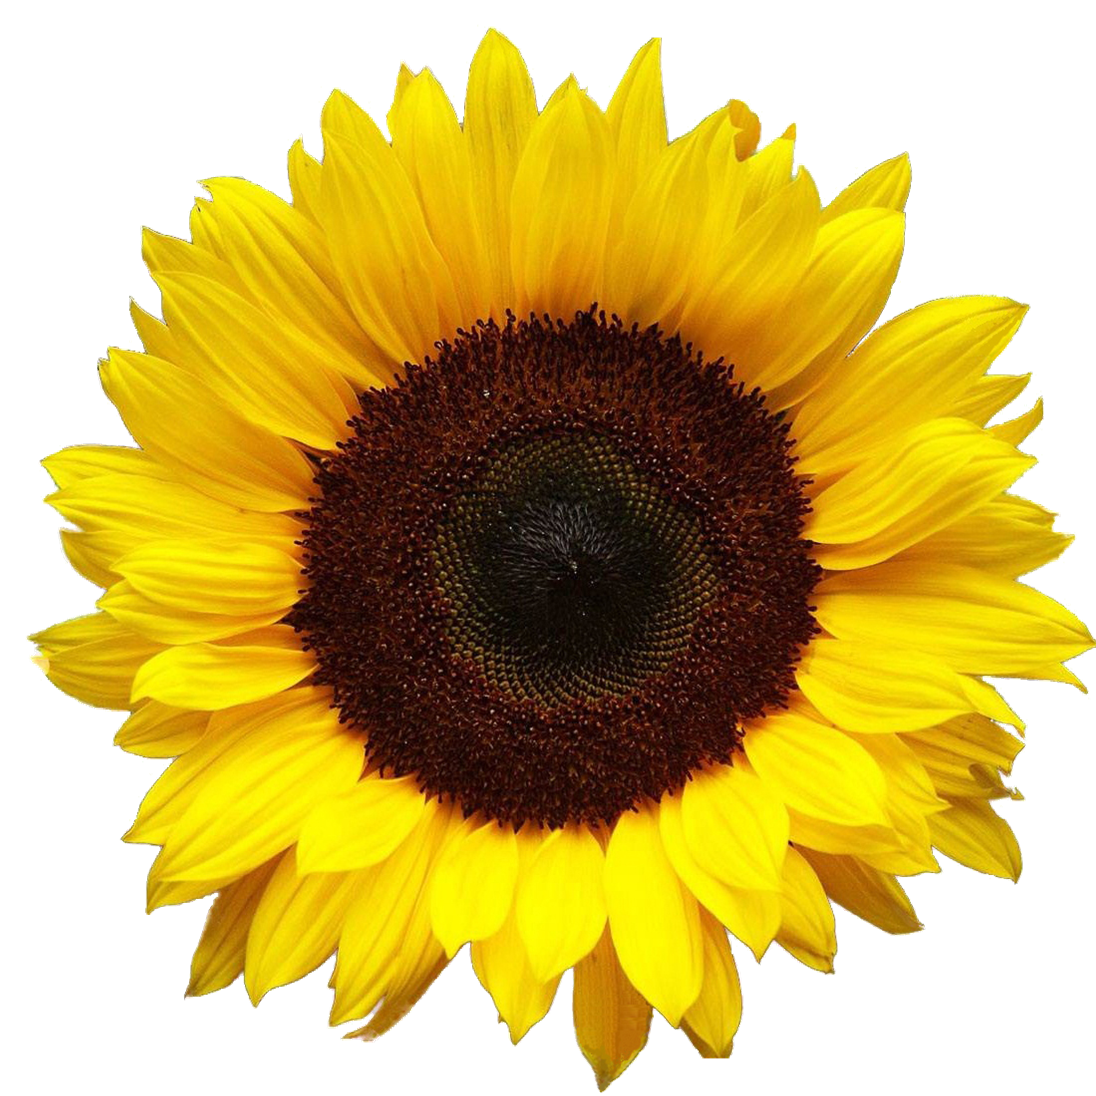 Sunflower PNG HD, Sunflower HD PNG - Free PNG